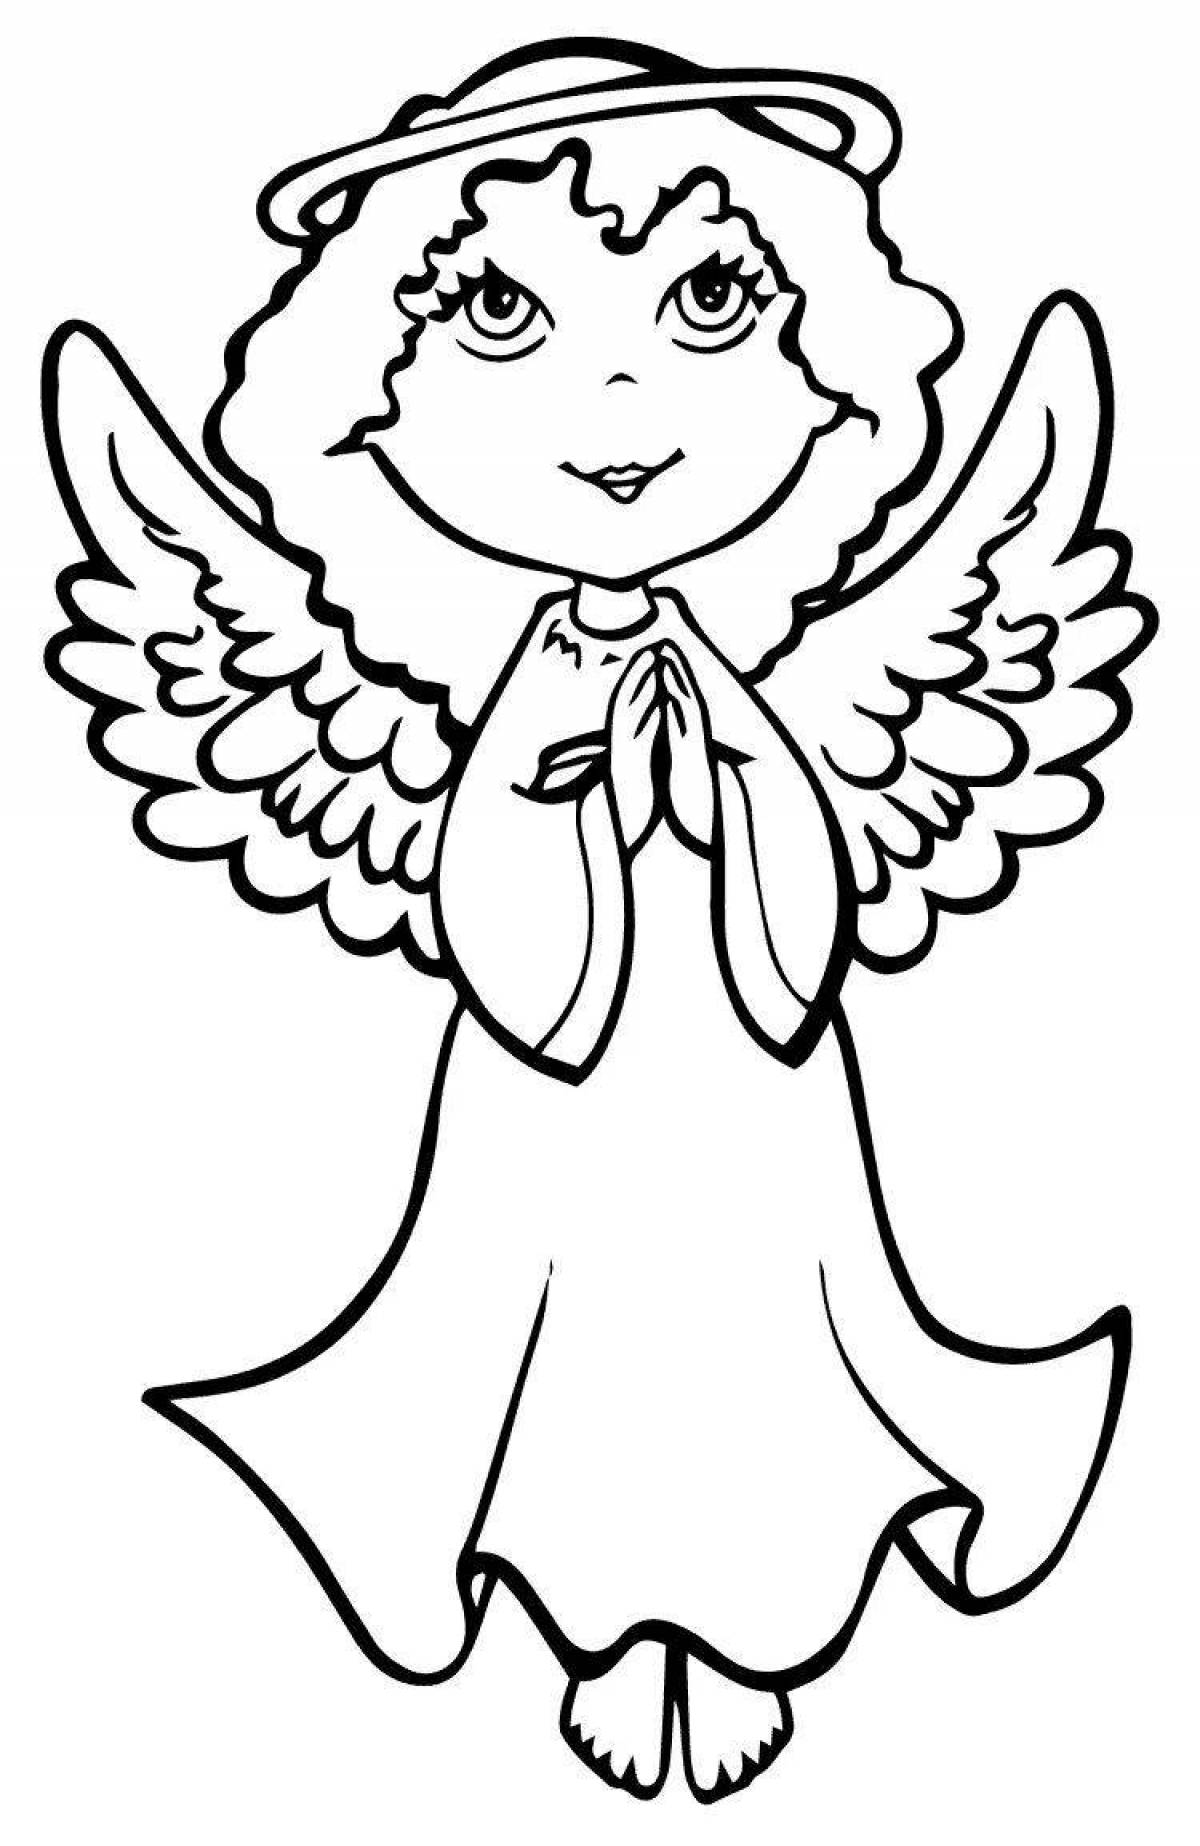 Great Christmas angel coloring page